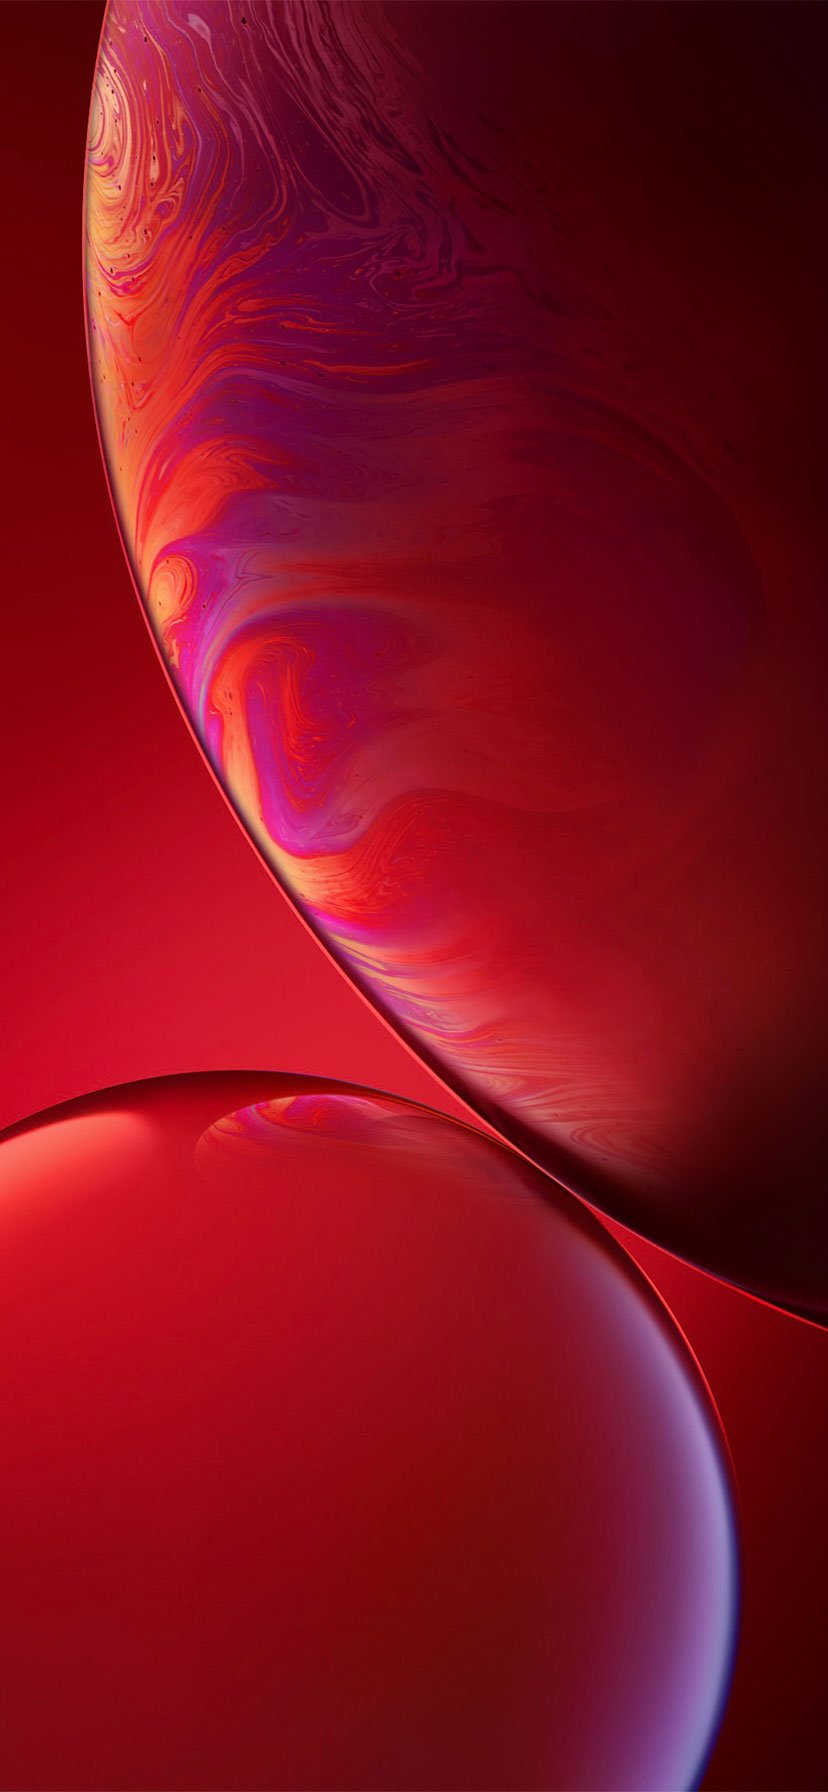 50+ Best High Quality iPhone XR Wallpapers & Backgrounds